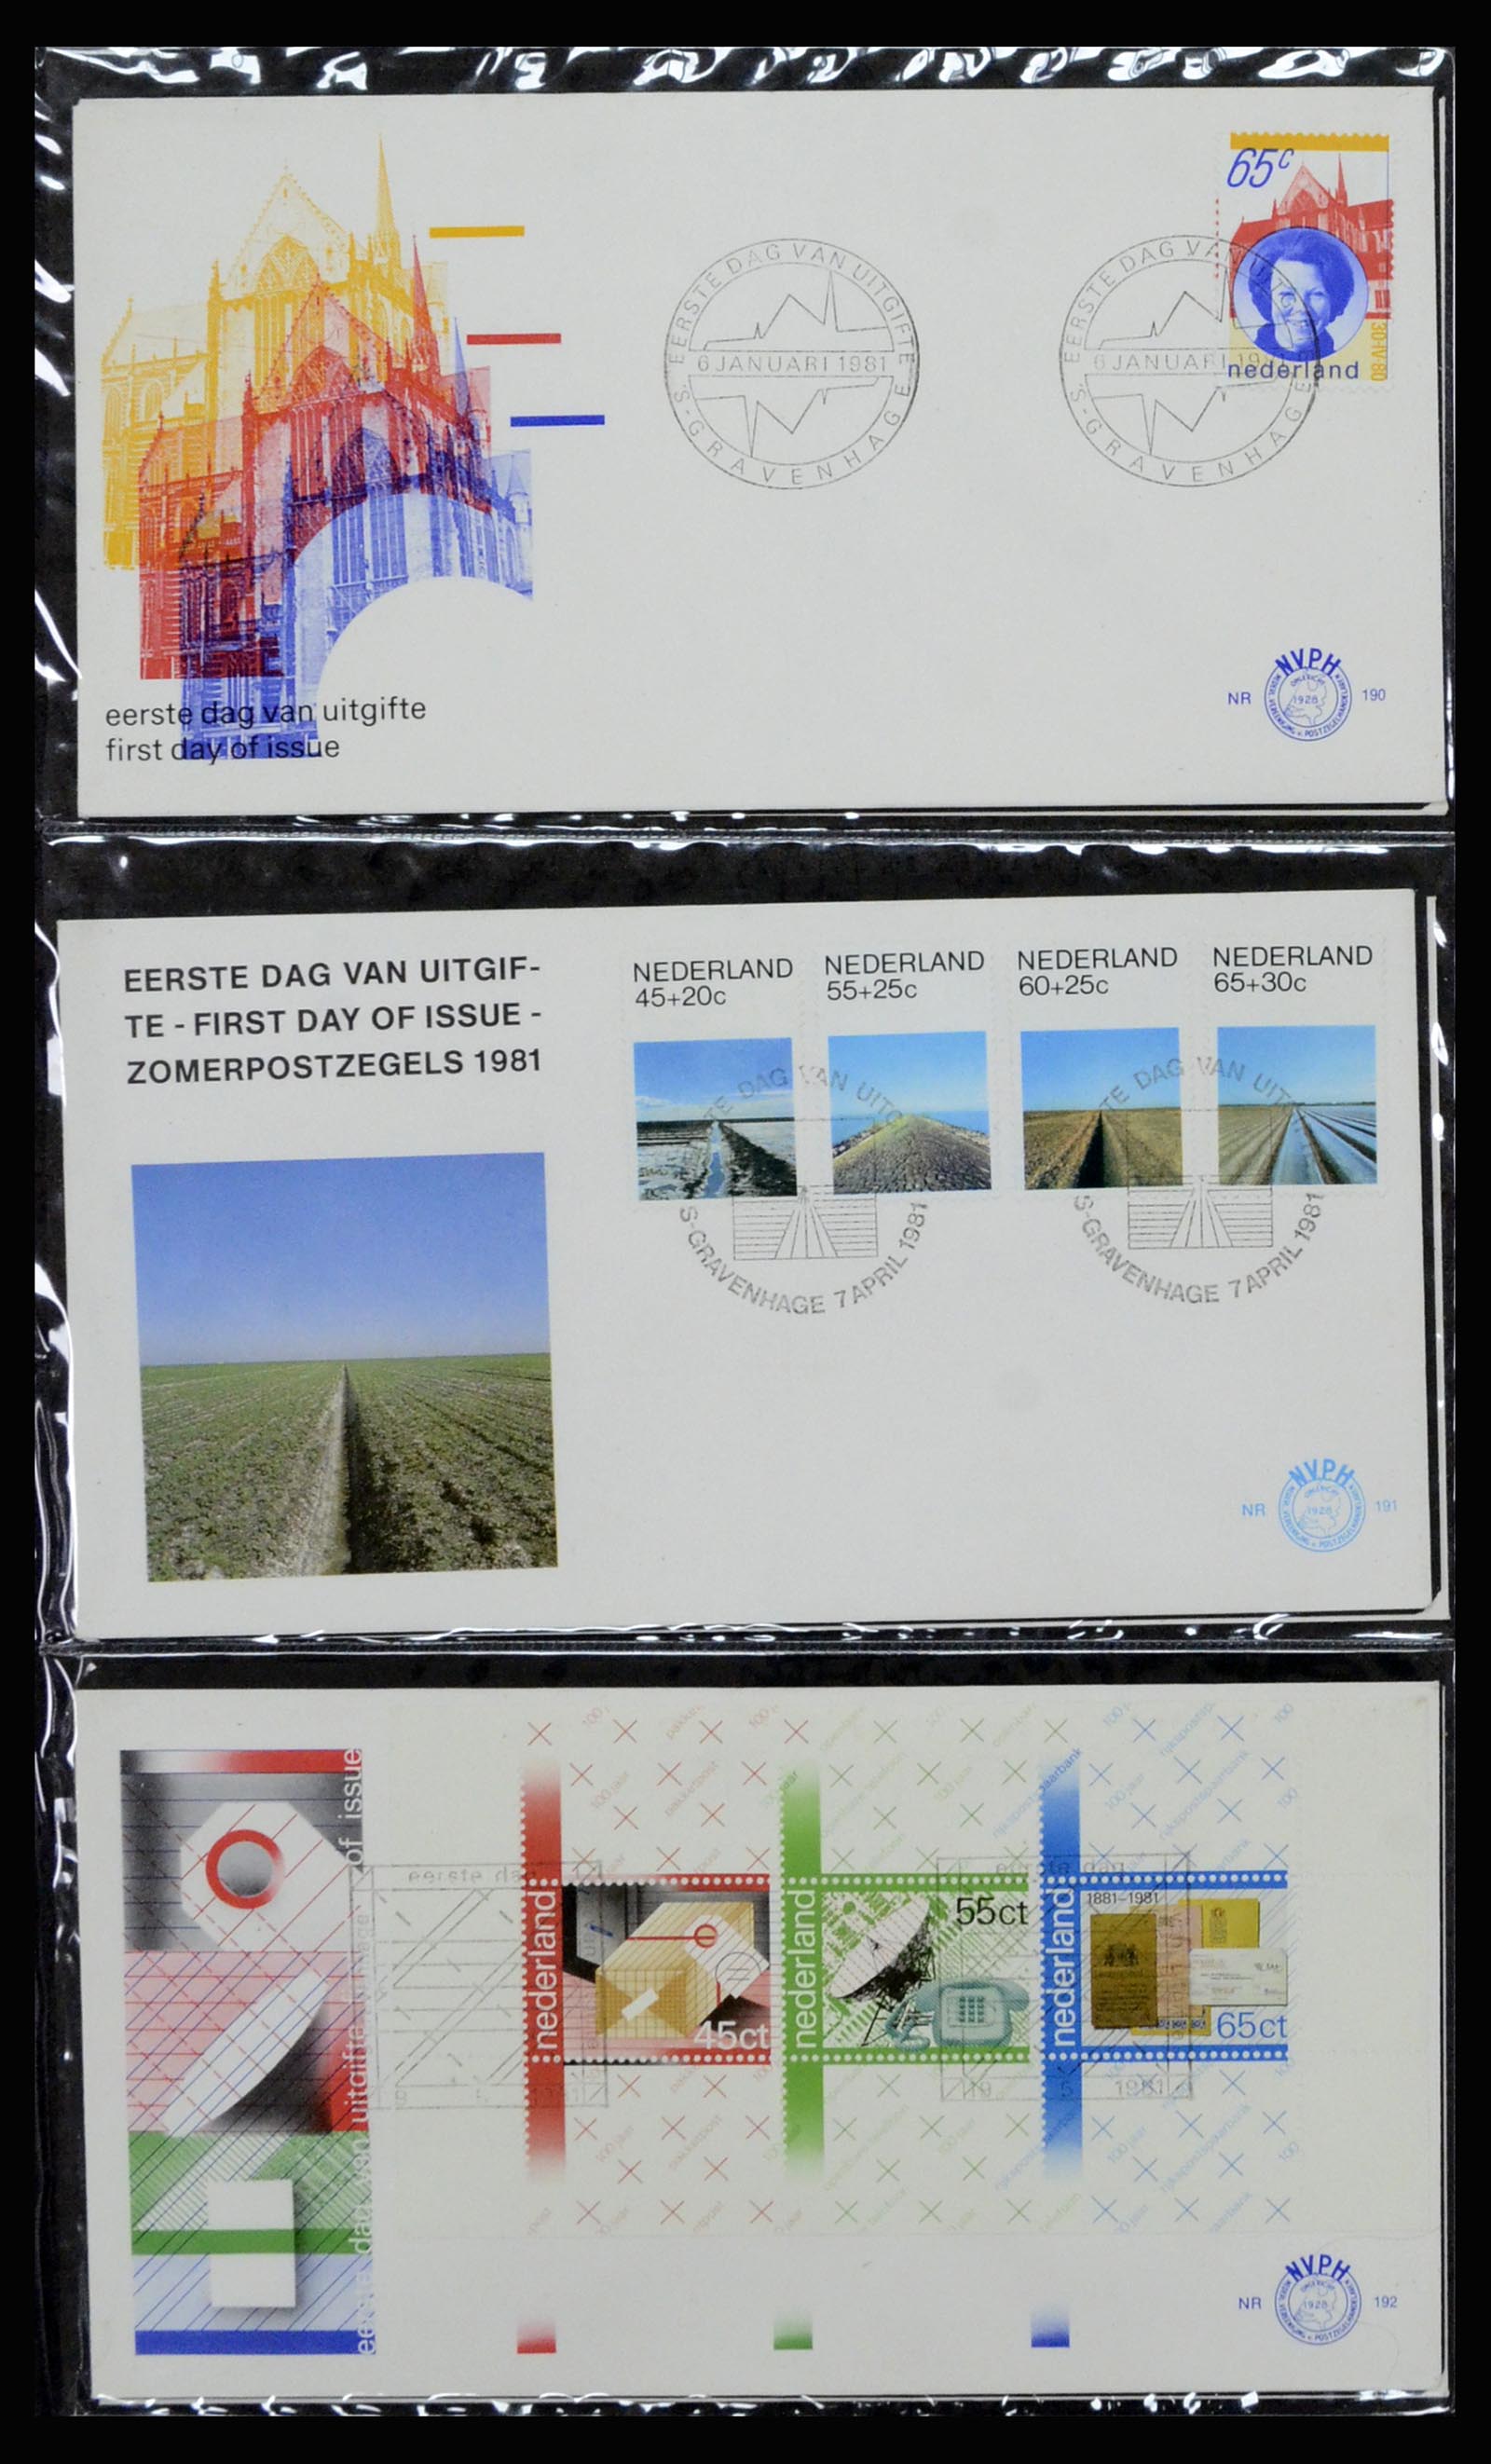 37197 070 - Stamp collection 37197 Netherlands FDC's 1950-2004.